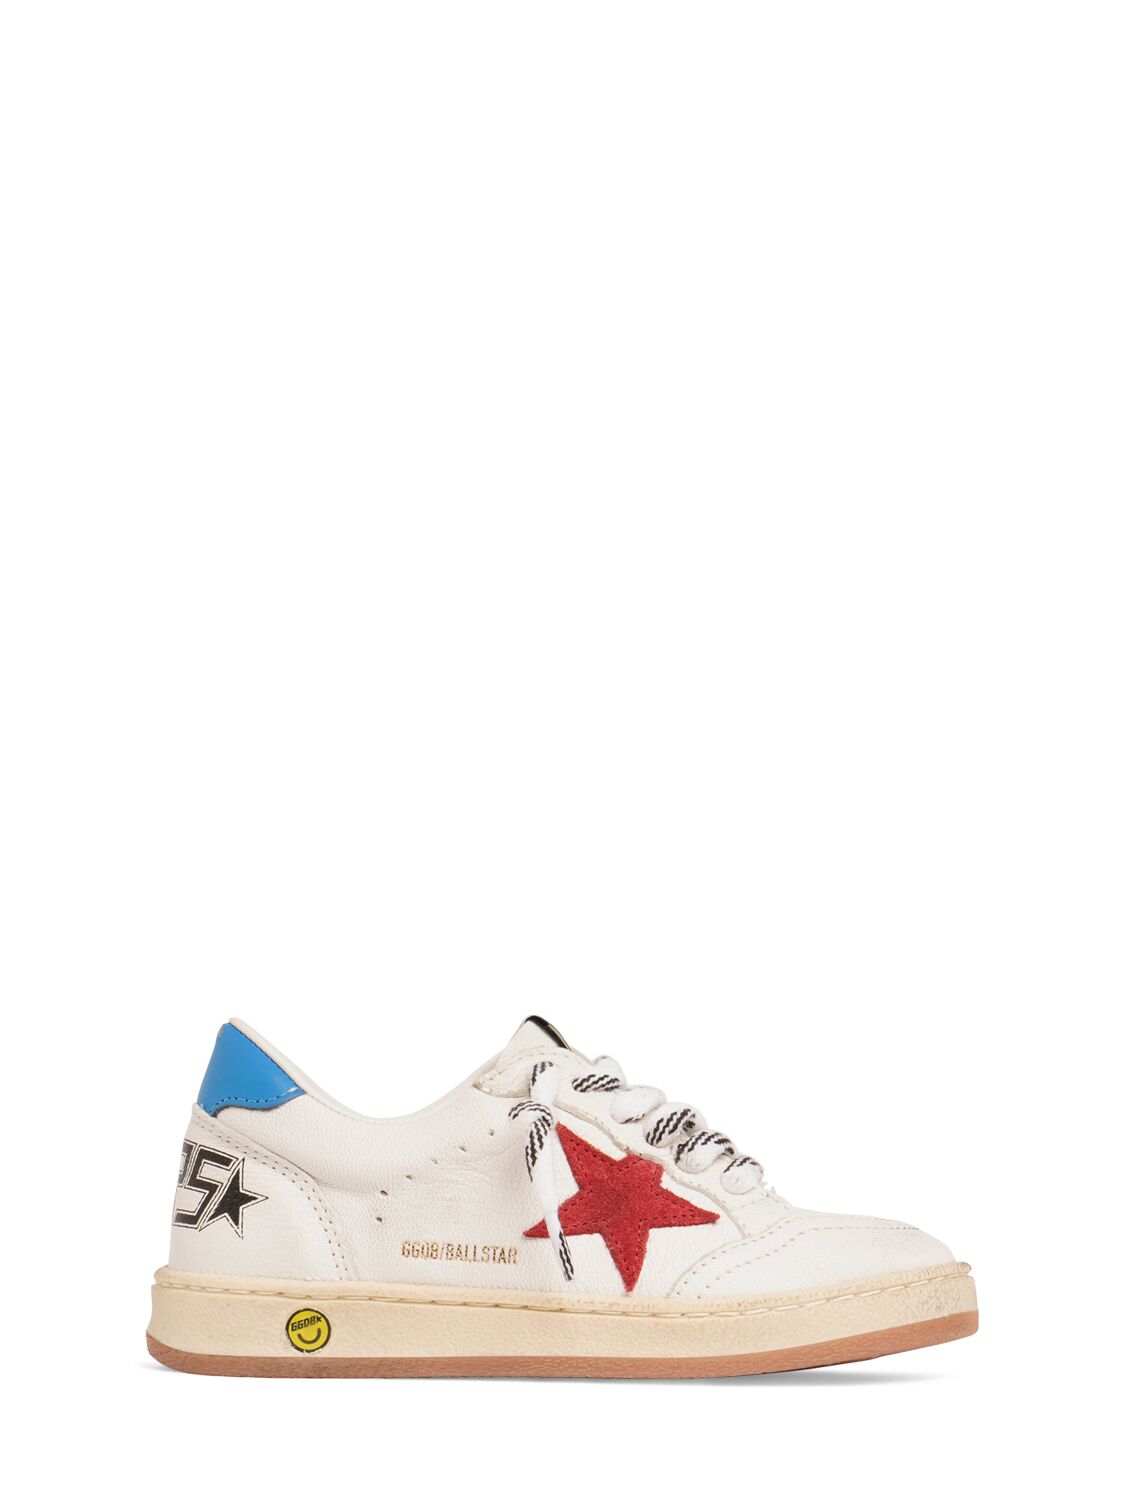 Golden Goose Kids' Ballstar Leather Lace-up Sneakers In Red,white,blue